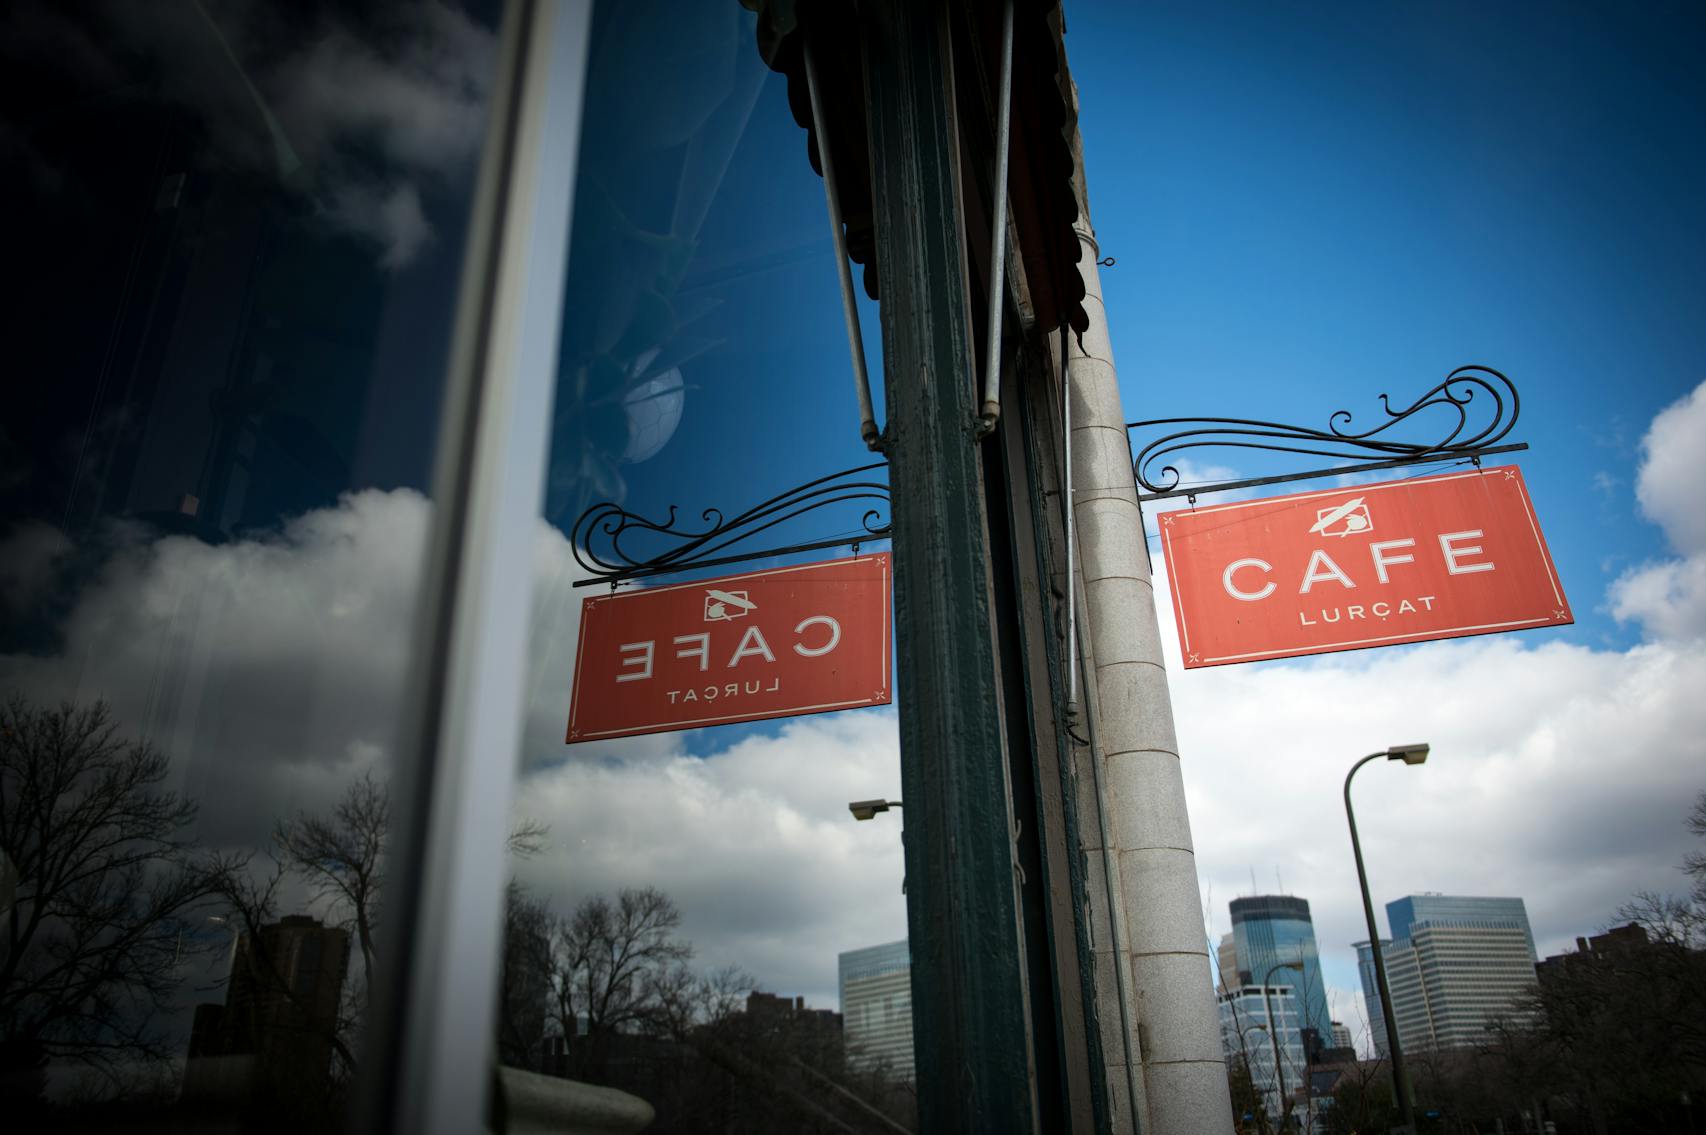 Cafe Lurcat’s exterior ] (AARON LAVINSKY/STAR TRIBUNE) aaron.lavinsky@startribune.com Restaurant review: Cafe Lurcat, a revisit to the 15-year-old D’Amico flagship on Loring Park reveals disappointments and happy surprises. We photograph the restaurant on Friday, April 8, 2016 in Minneapolis, Minn.